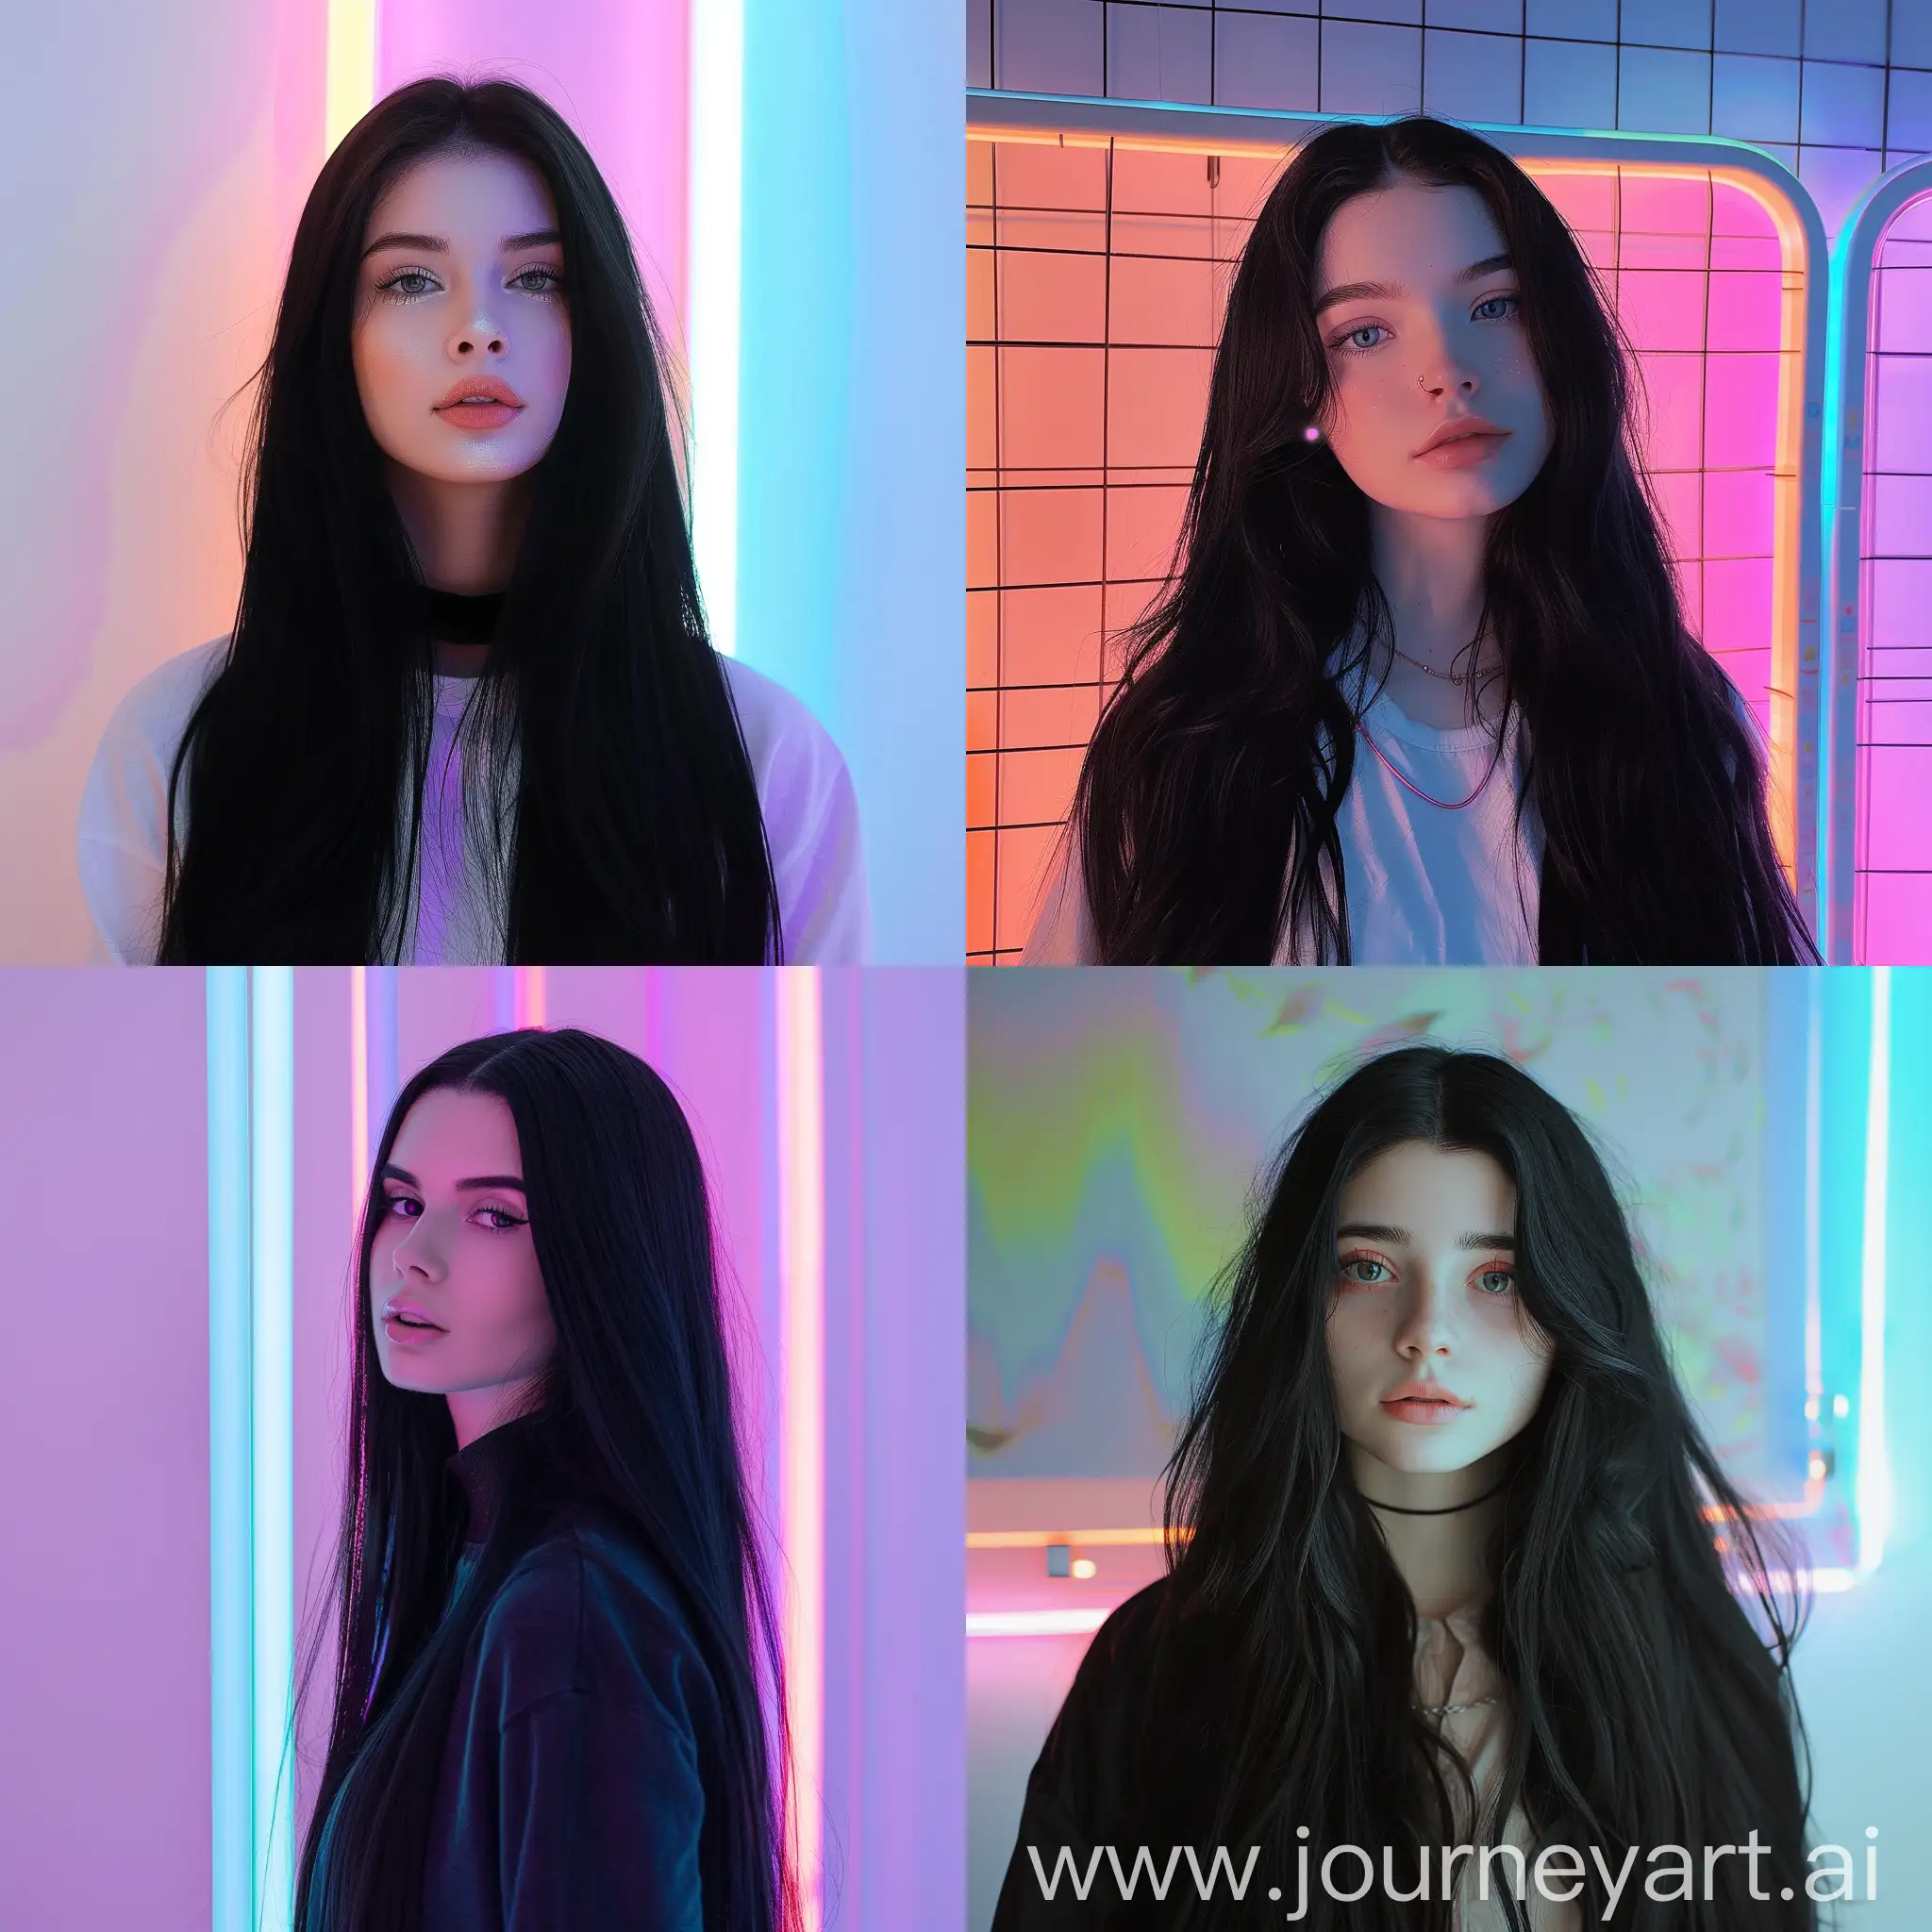 Aesthetic instagram picture real person, caucasian girl with long black hair with a pastel lit wall behind her